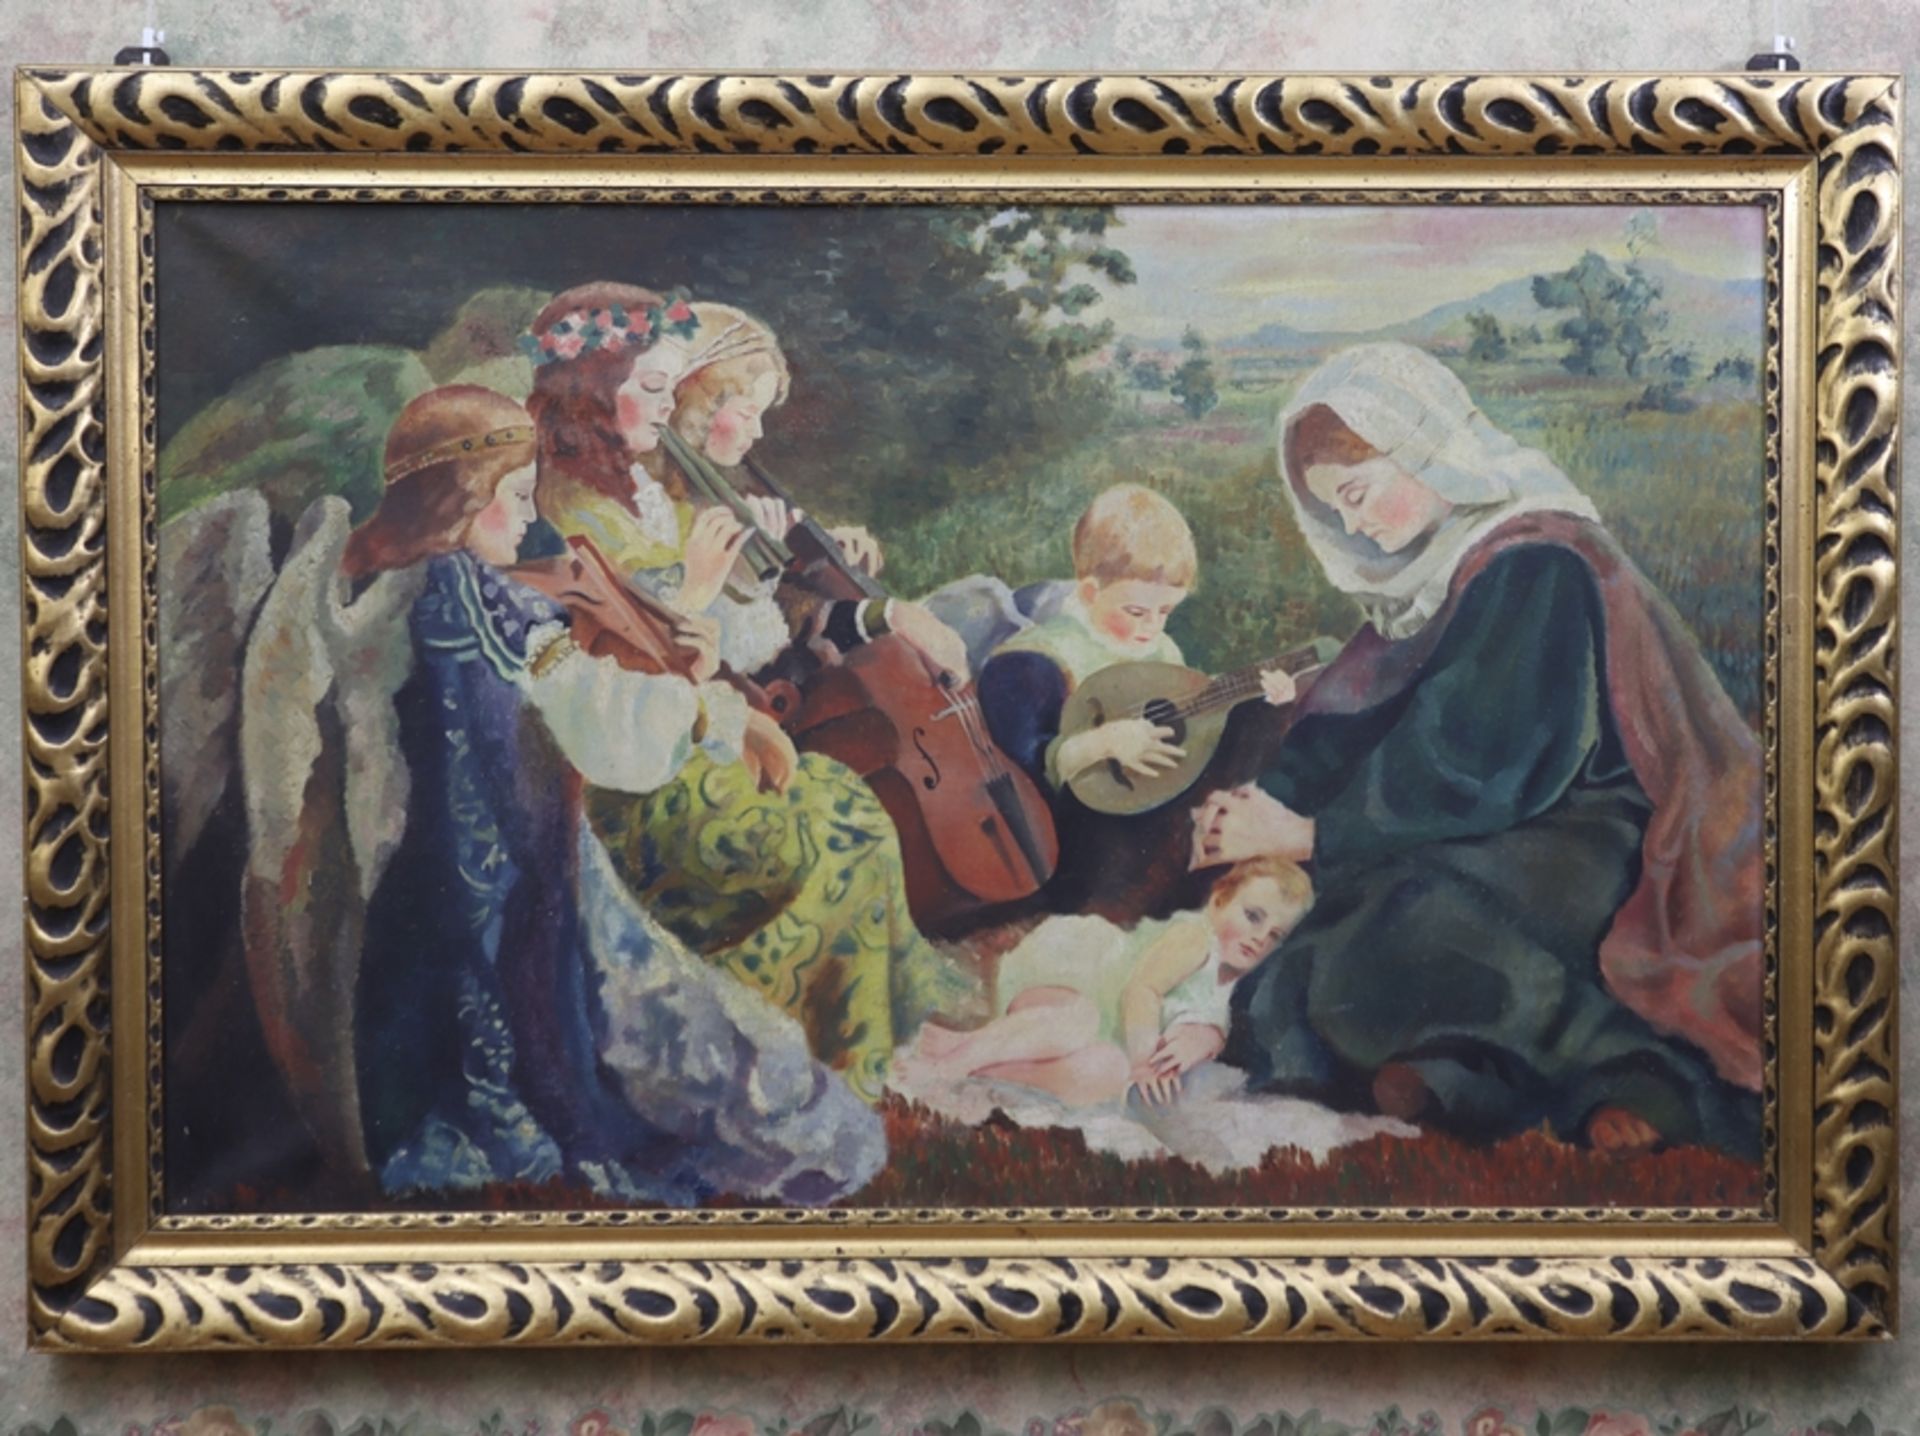 Unknown artist of the 20th century, angels playing music with the infant Jesus - Image 2 of 2